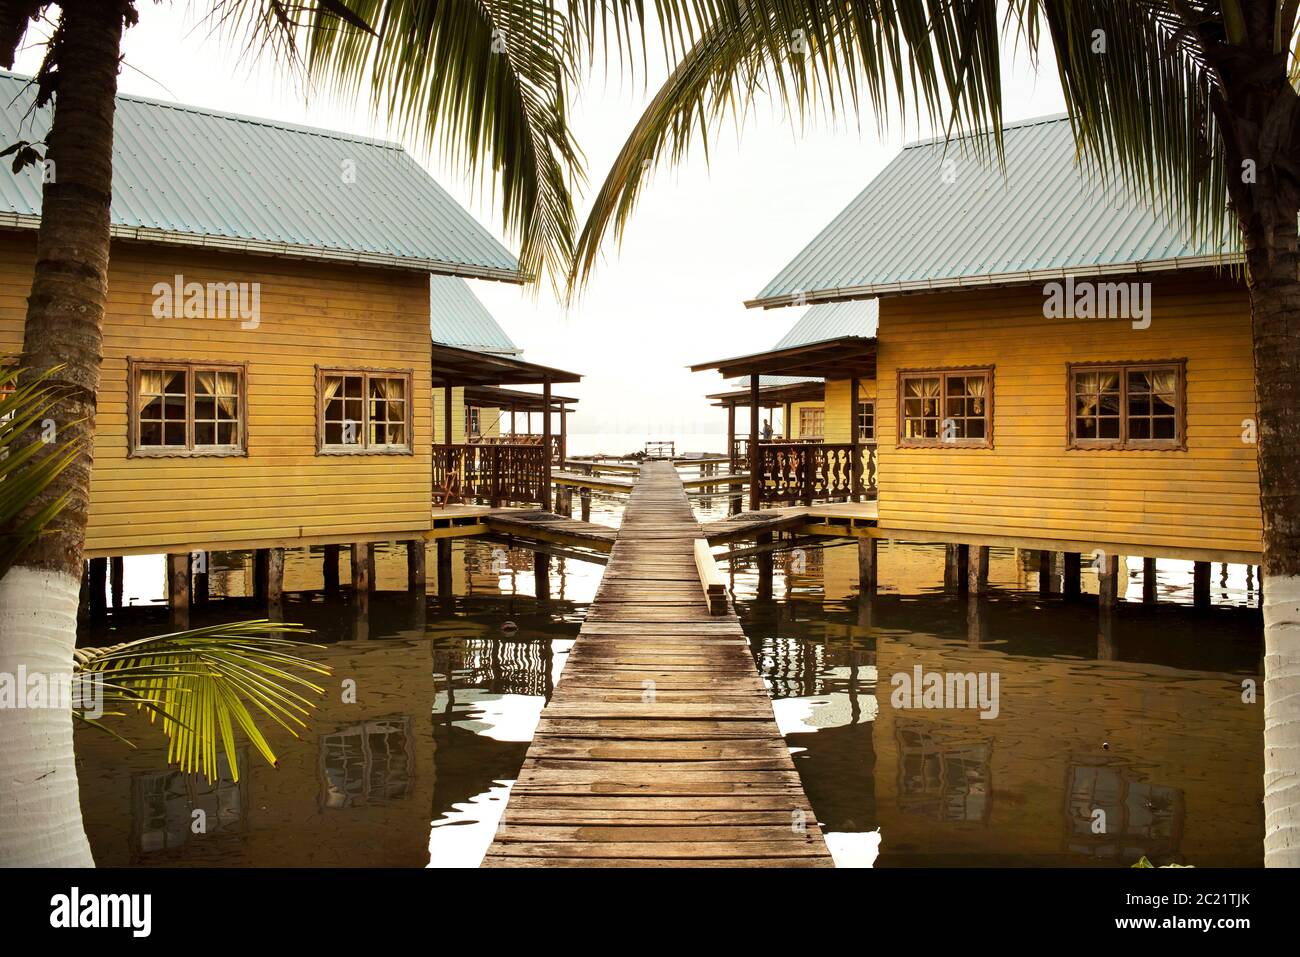 Over the water holiday bungalows. Stilt houses are popular in the Caribbean, Bocas del Toro, Bocas Town, Panama. Oct 2018 Stock Photo